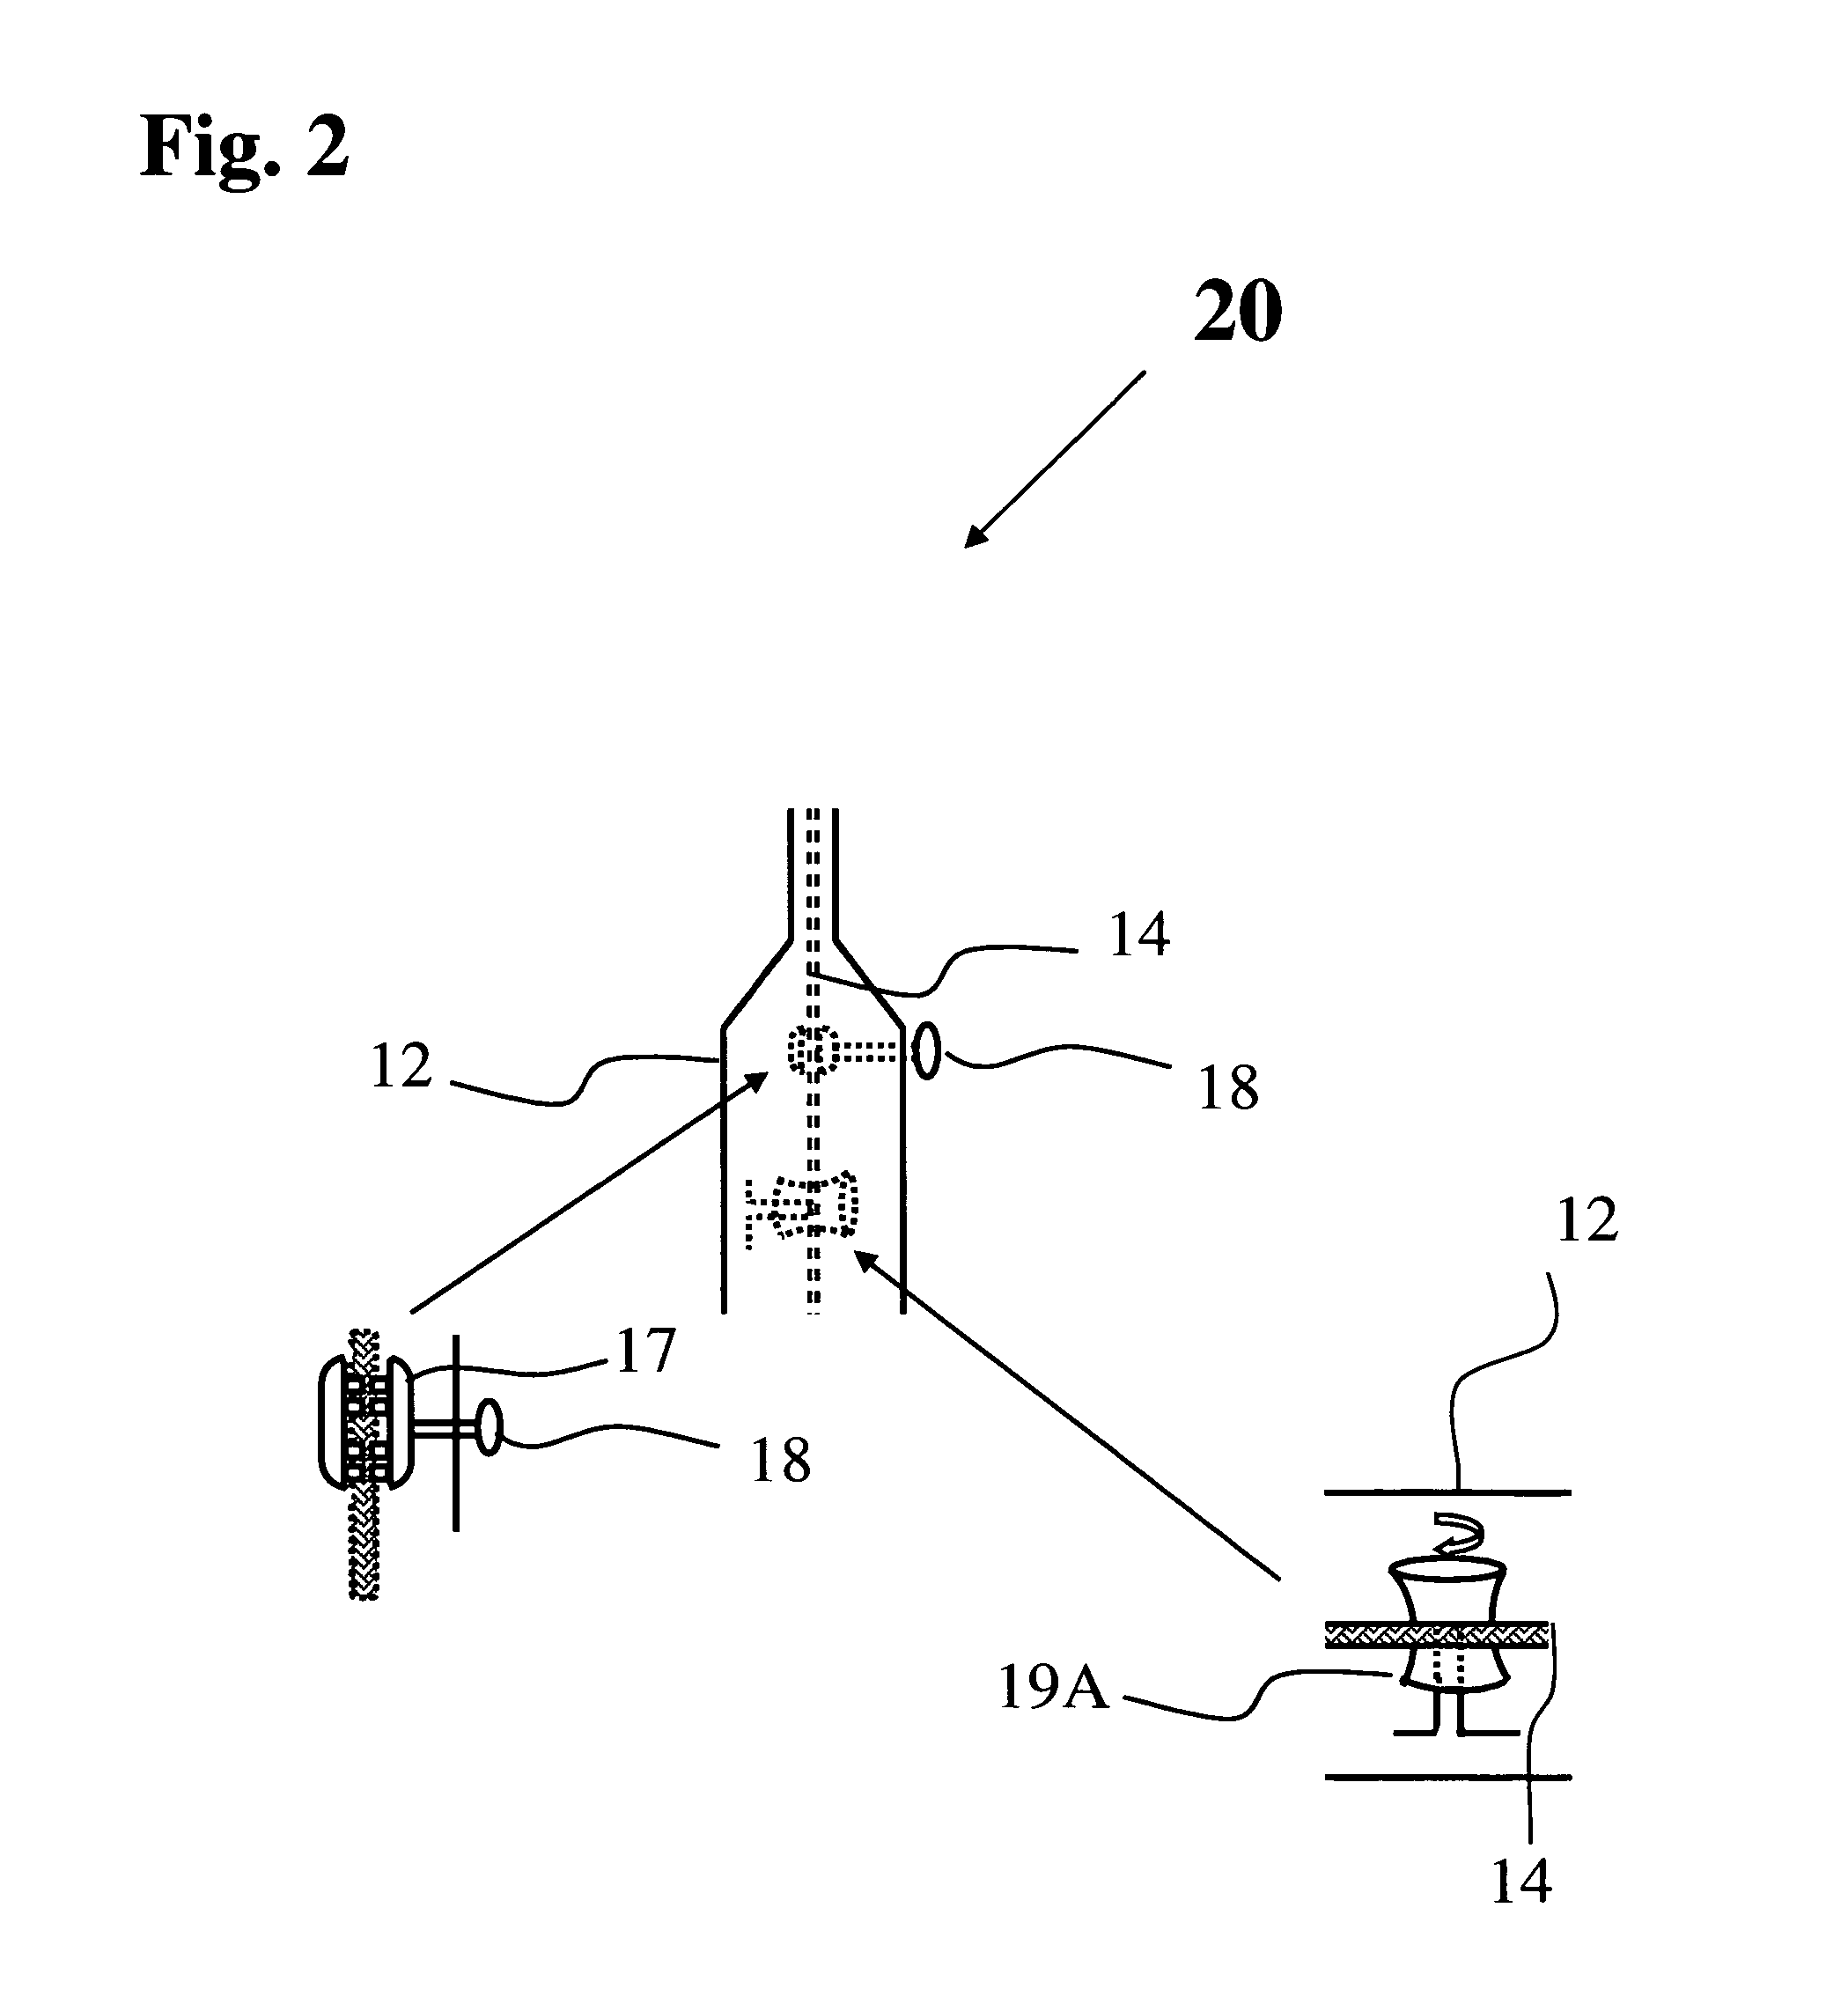 Continuous feed inter-dental brush and device